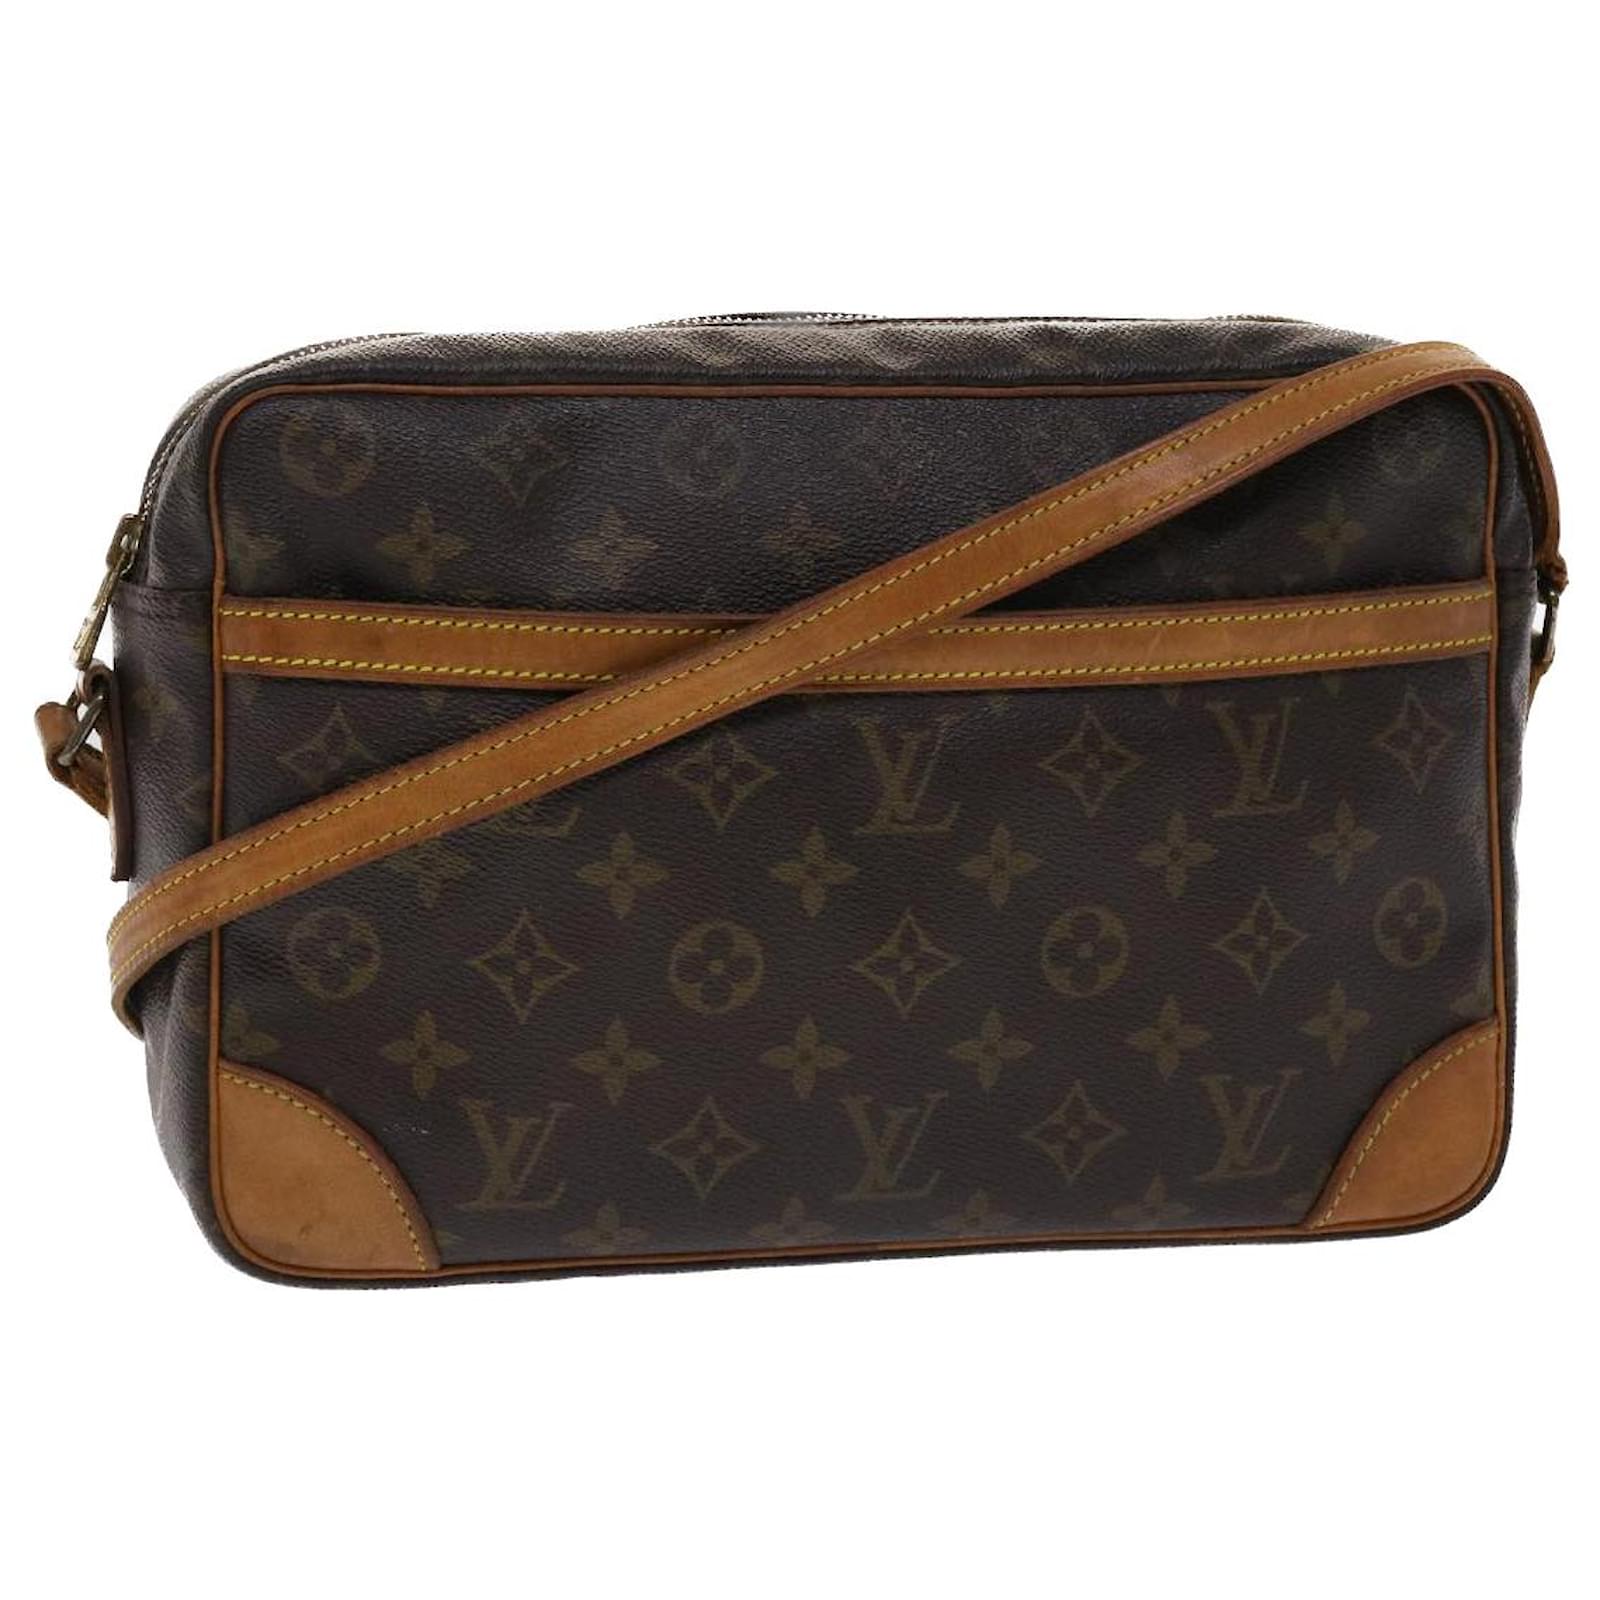 Shop for Louis Vuitton Monogram Canvas Leather Trocadero 27 cm Bag -  Shipped from USA